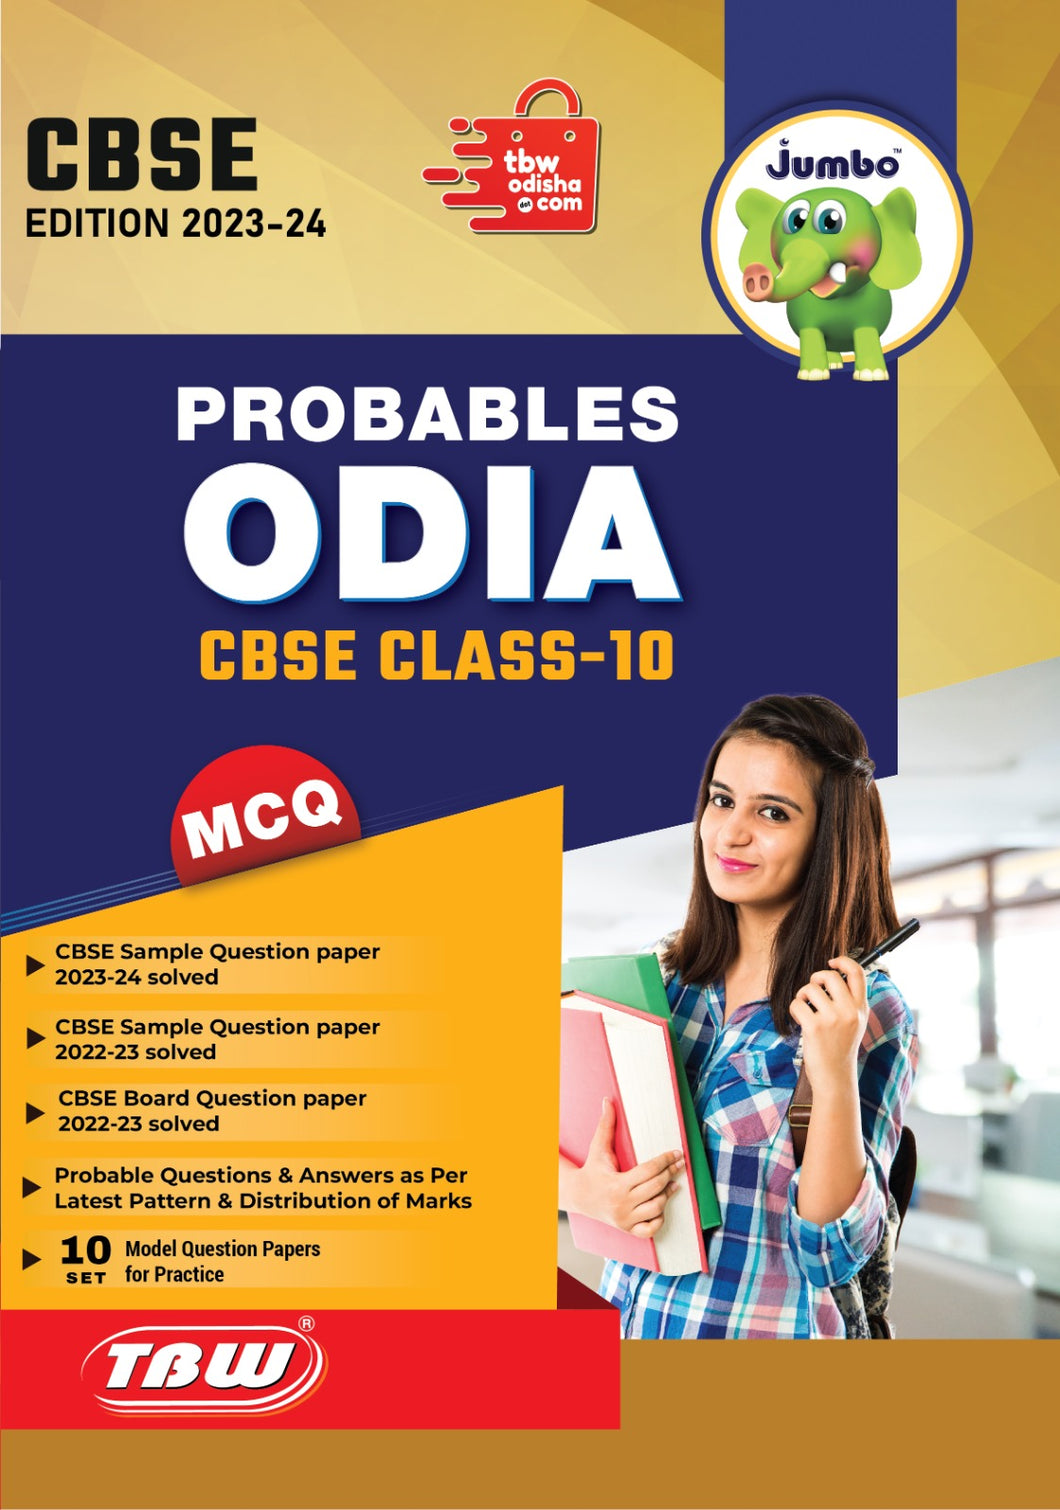 Jumbo CBSE Class 10 ODIA Probabales 2024 by TBW